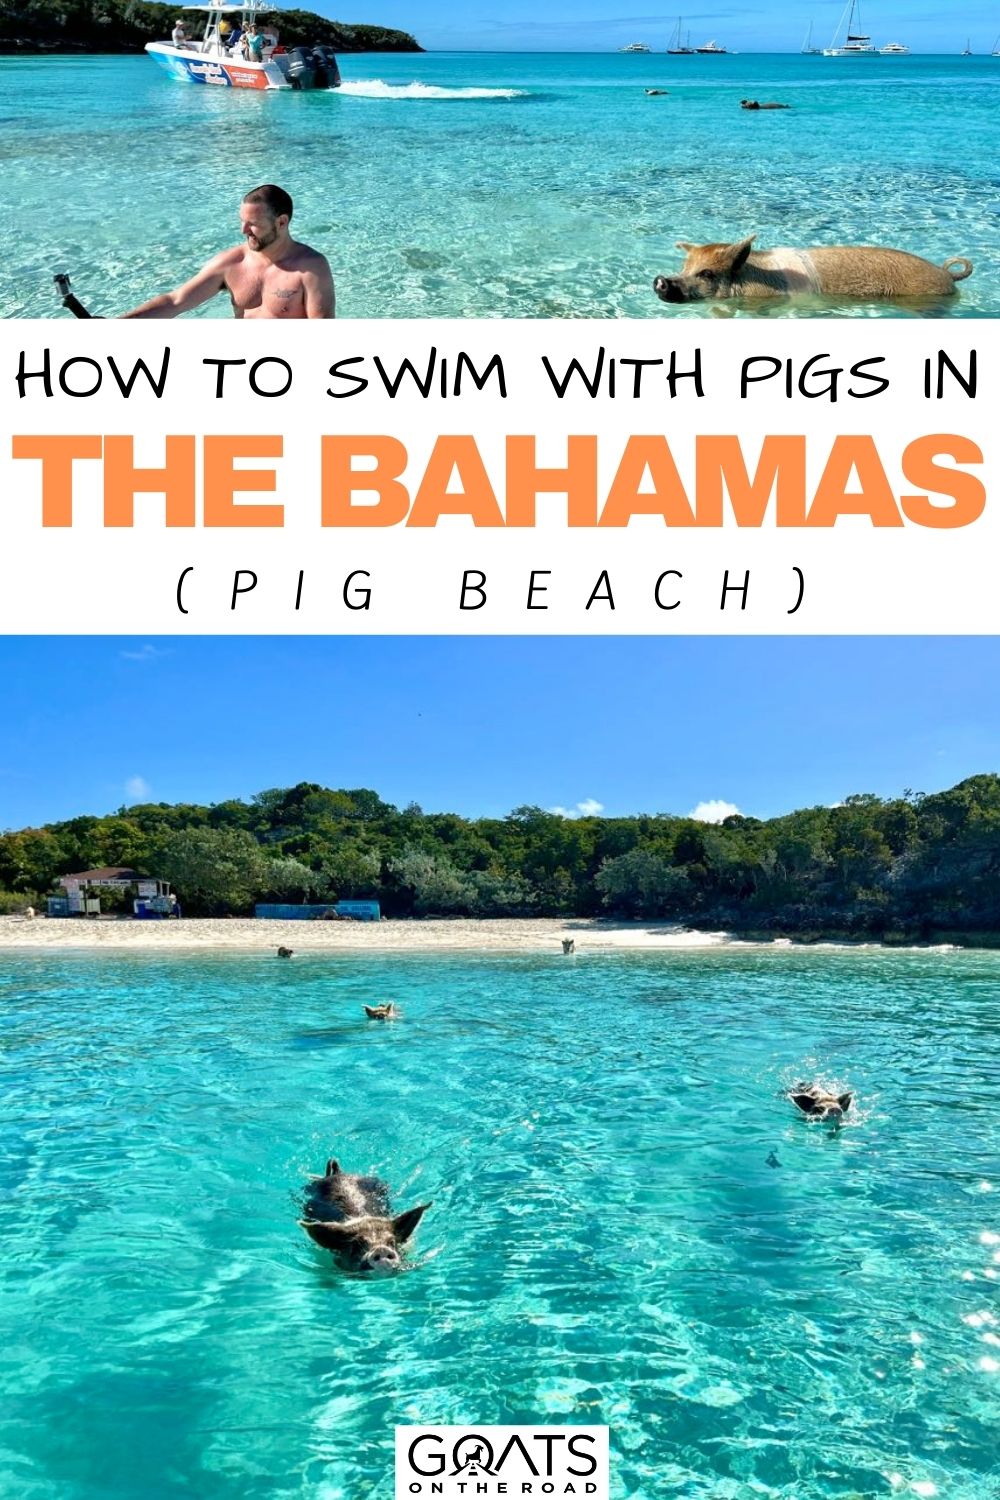 “How To Swim With Pigs in The Bahamas (Pig Beach)